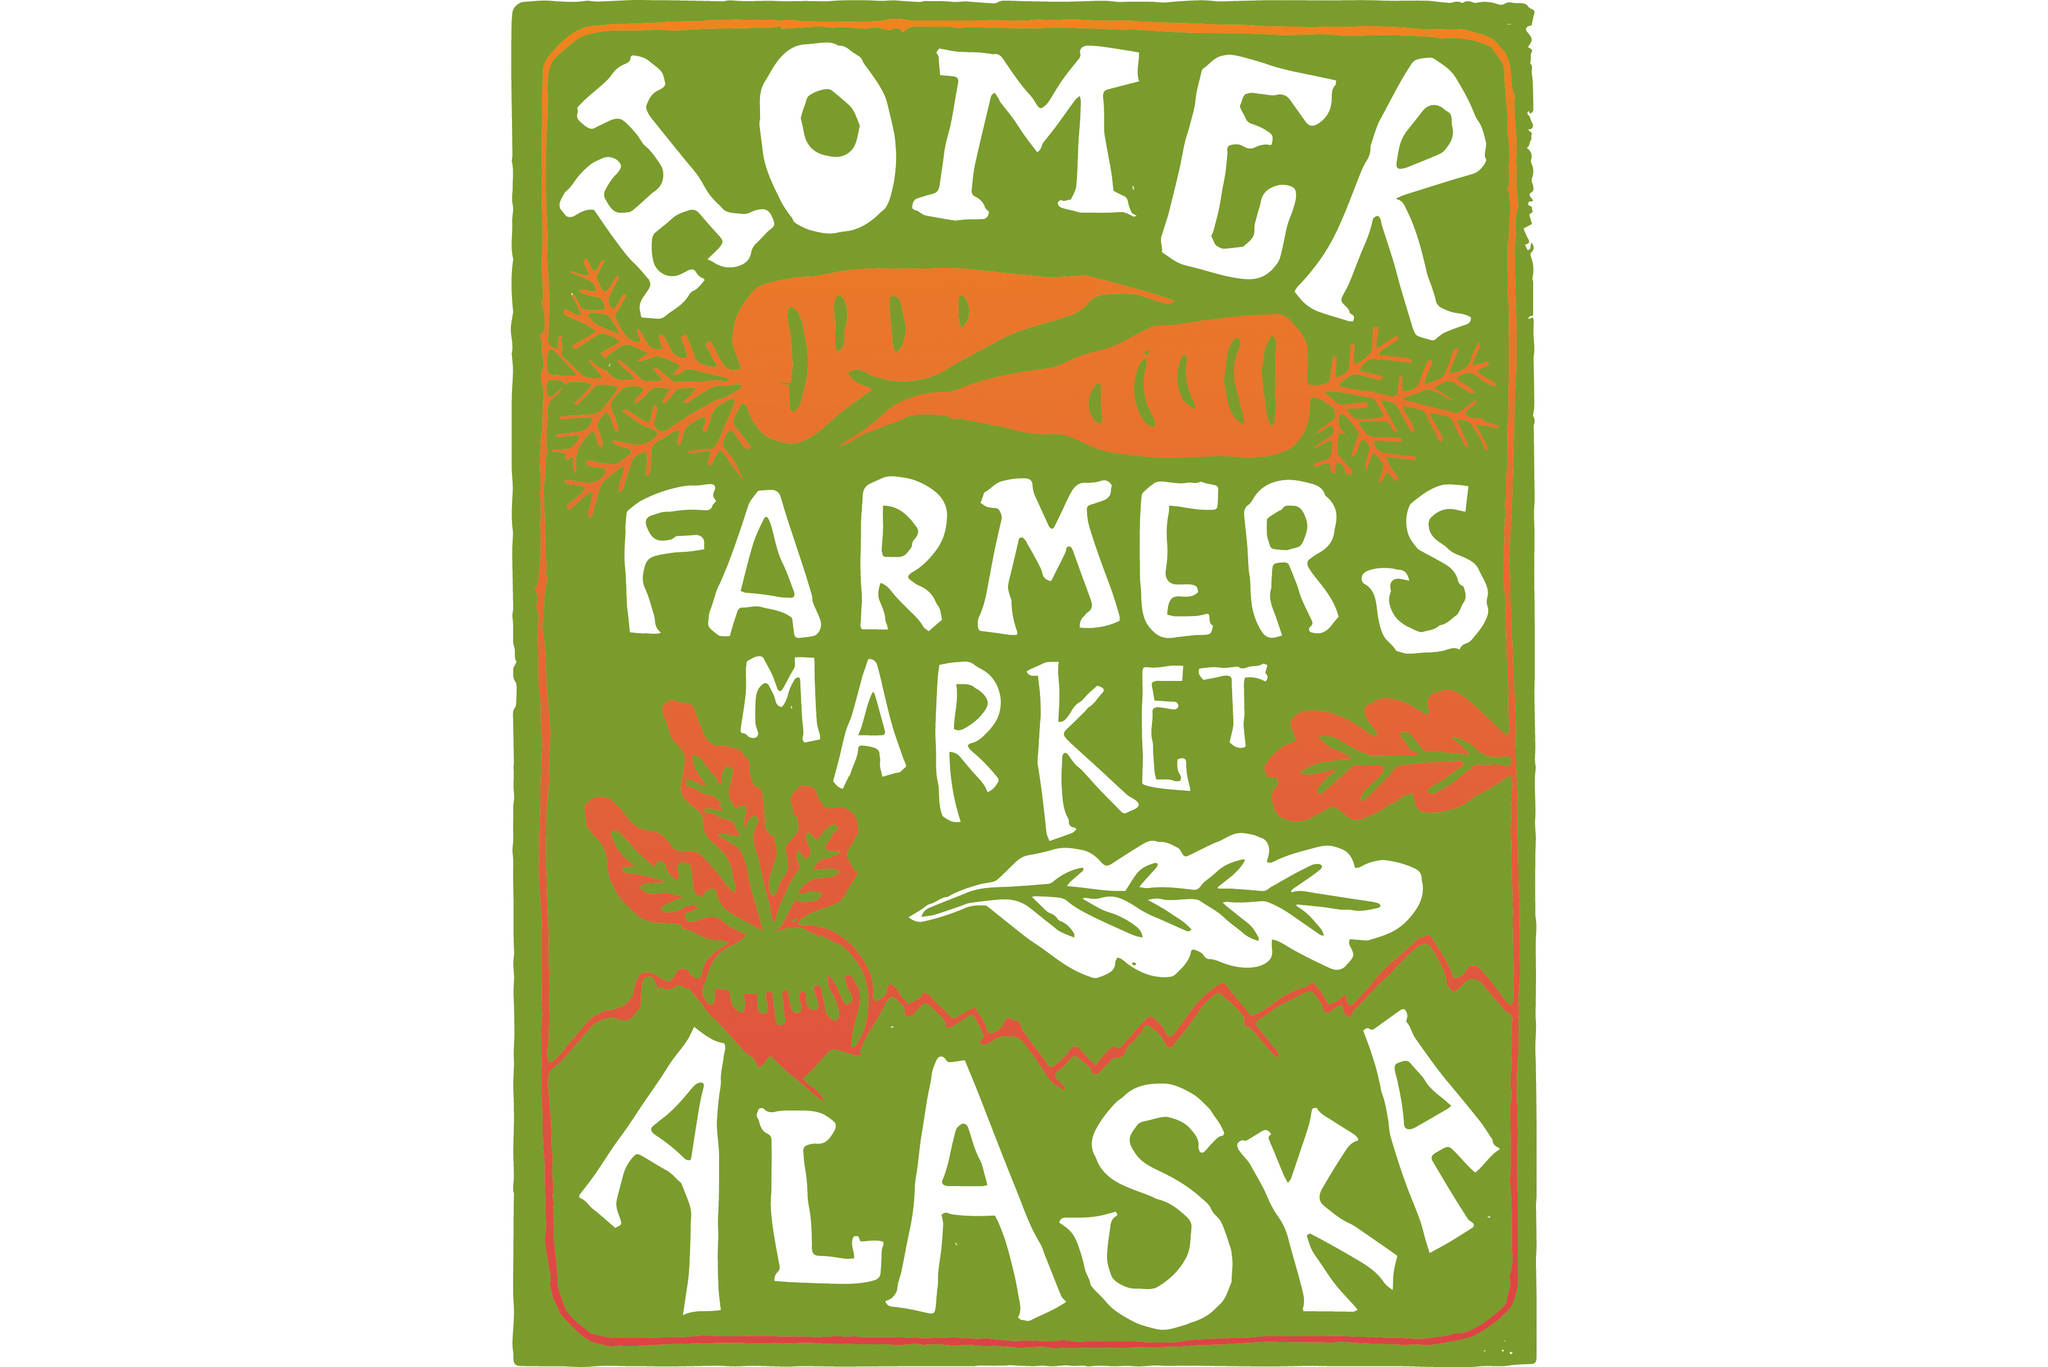 Homer Farmers Market: Market is officially closed, but food still abounds